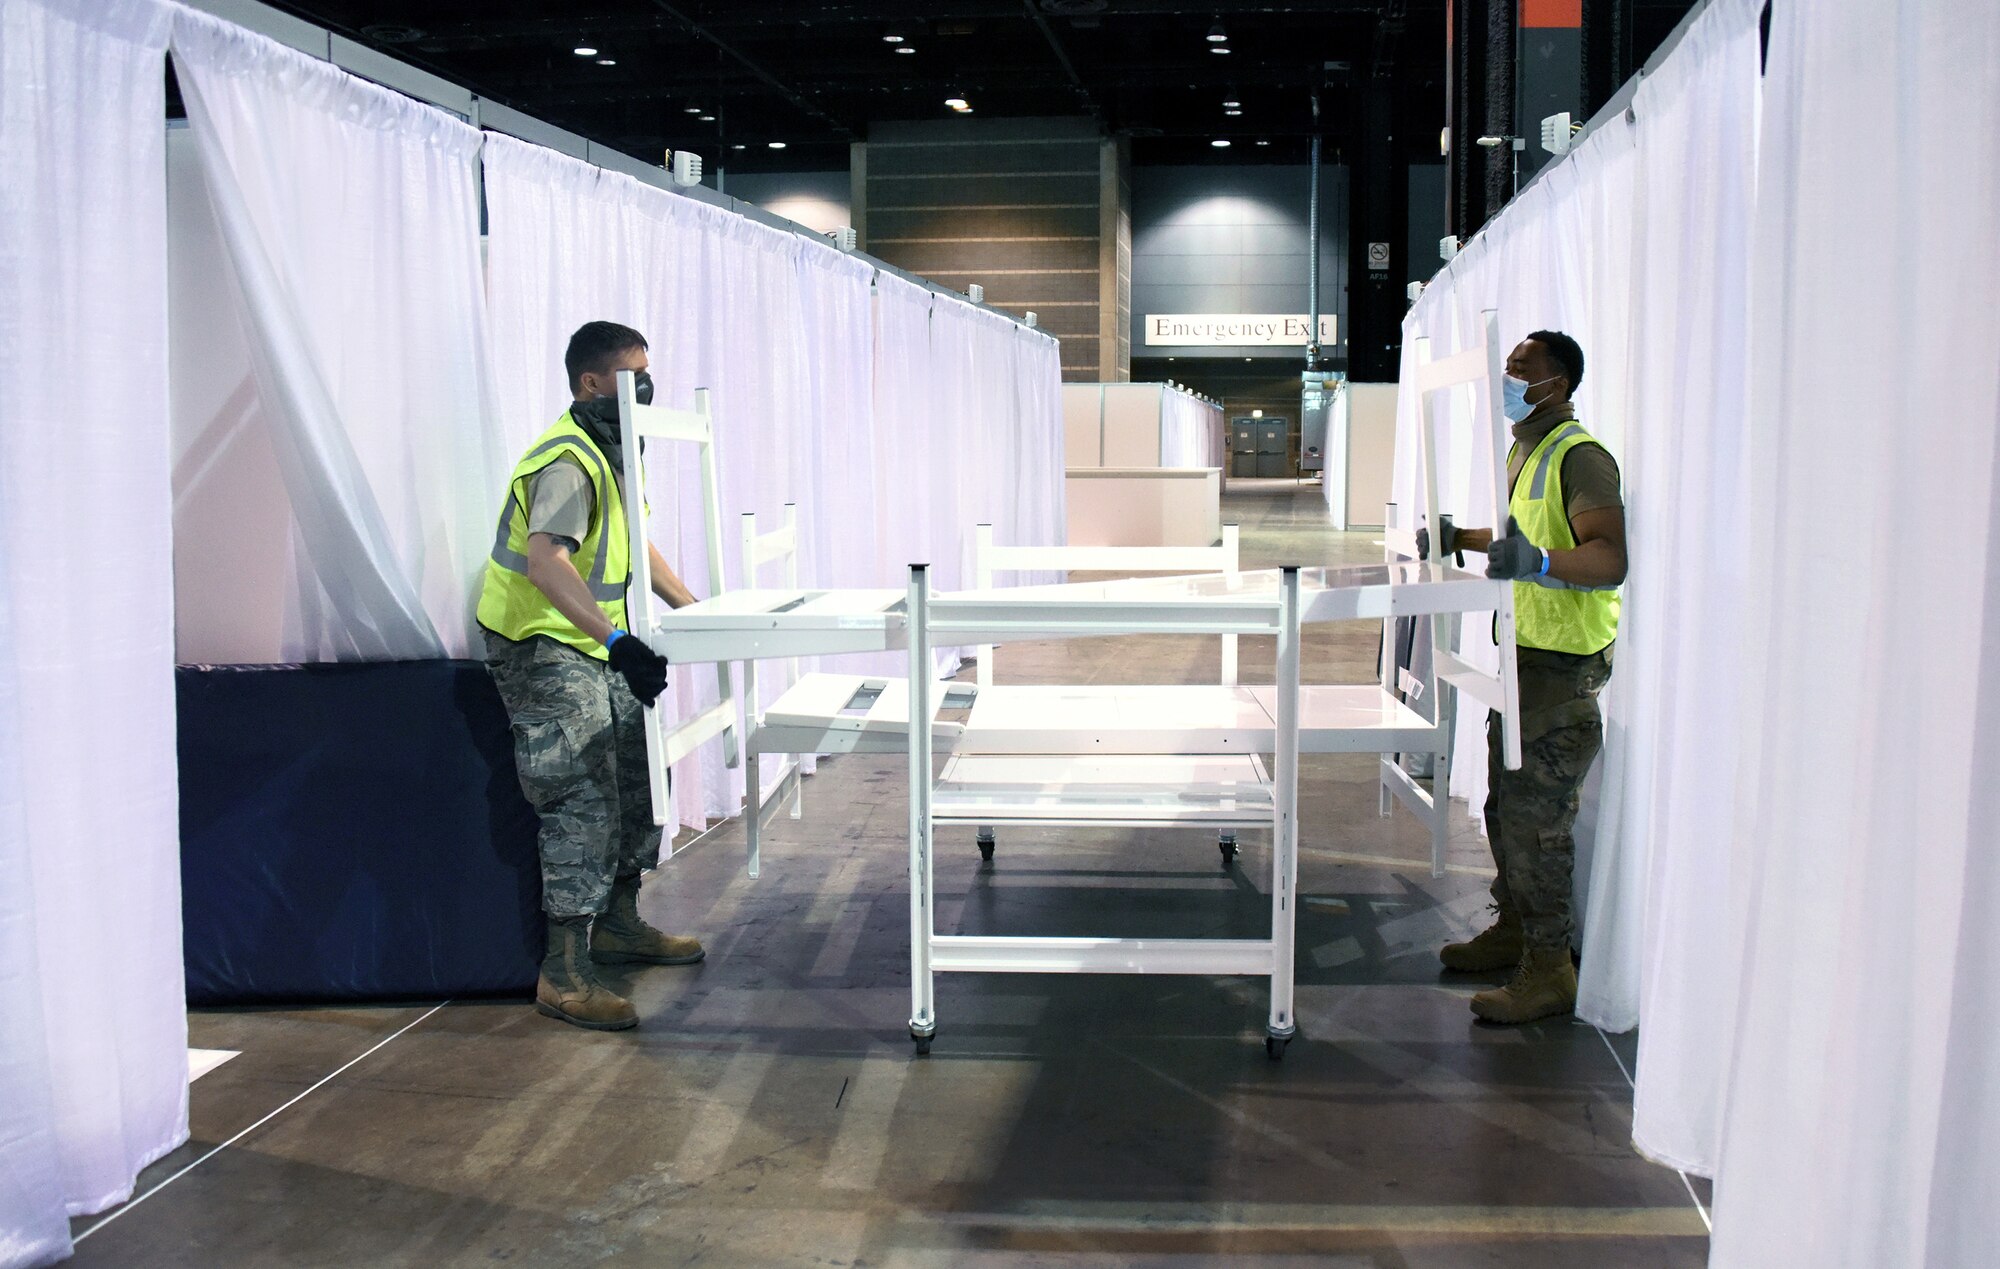 Air Force Tech. Sgt. Adam Dyer, left, and Senior Airman Koami Kunakey, both assigned to the Illinois Air National Guard’s 182nd Airlift Wing, place beds in treatment cubicles at the McCormick Place Convention Center in Chicago while taking part in COVID-19 response efforts, April 11, 2020. Illinois National Guard members were assisted by a nine-person medical team from the Polish military. Since 1993, the Illinois Guard and the Polish military have been partners in the Department of Defense’s State Partnership Program.